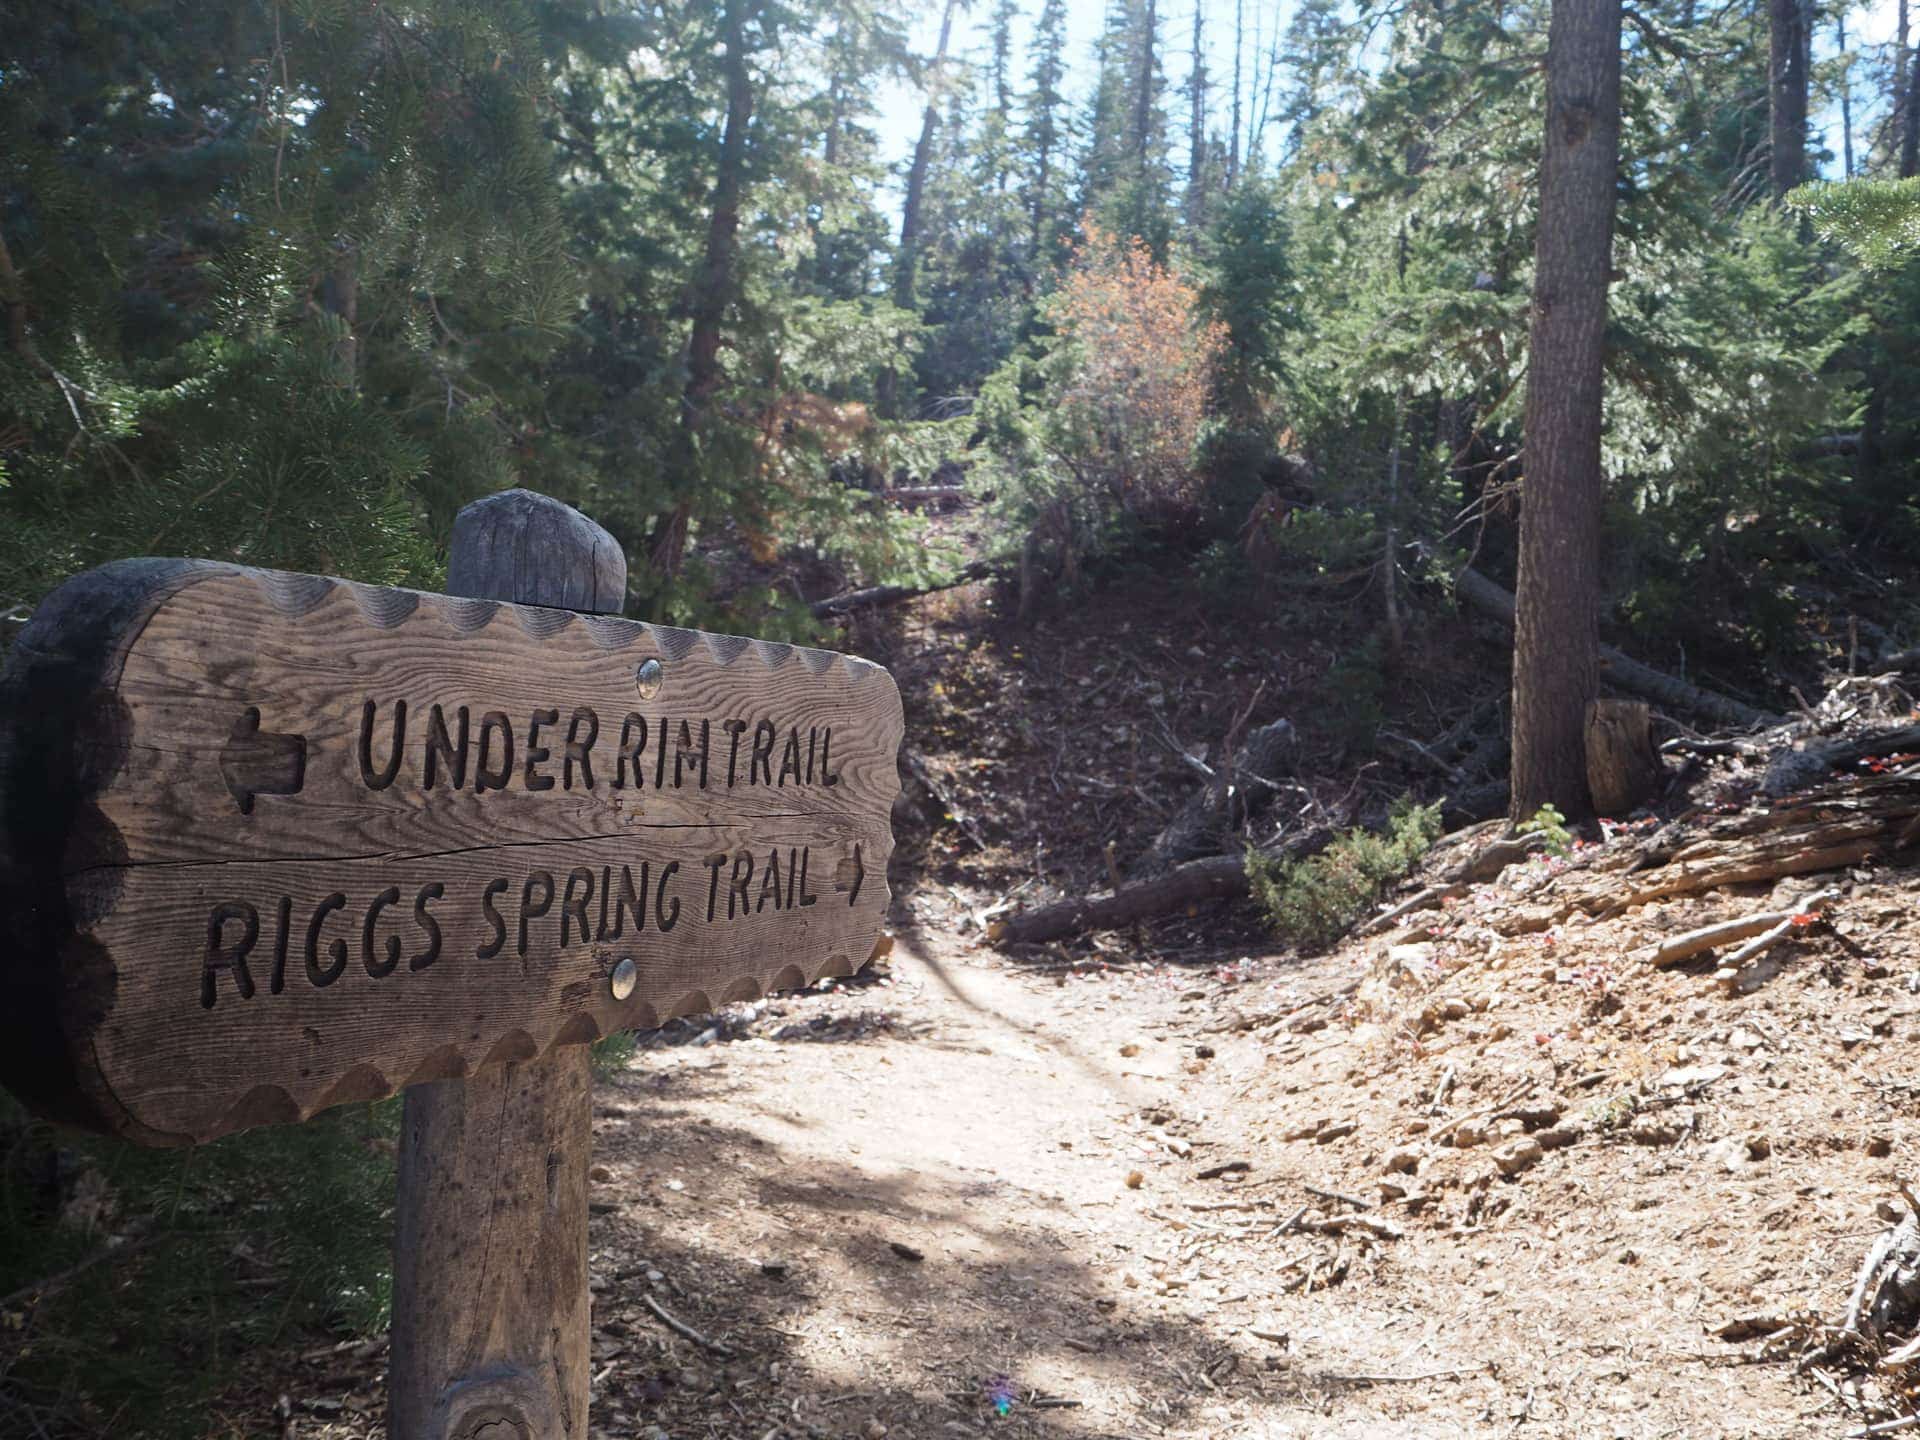 Riggs Spring Trail sign pointing straight ahead